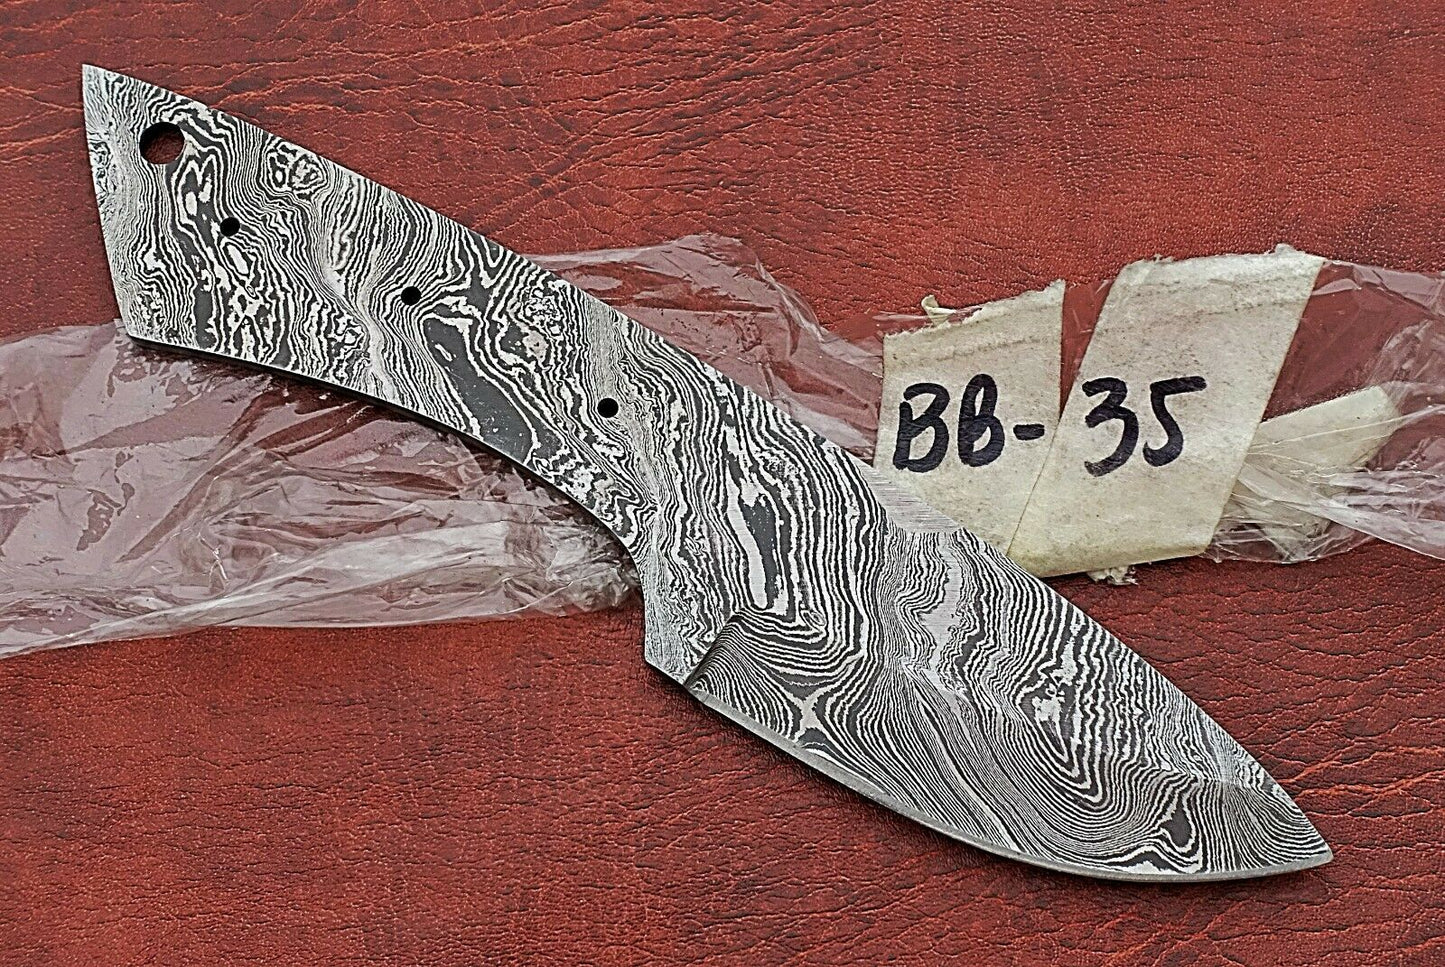 7.75" drop point Damascus steel blank blade pocket knife with 3.5" cutting edge